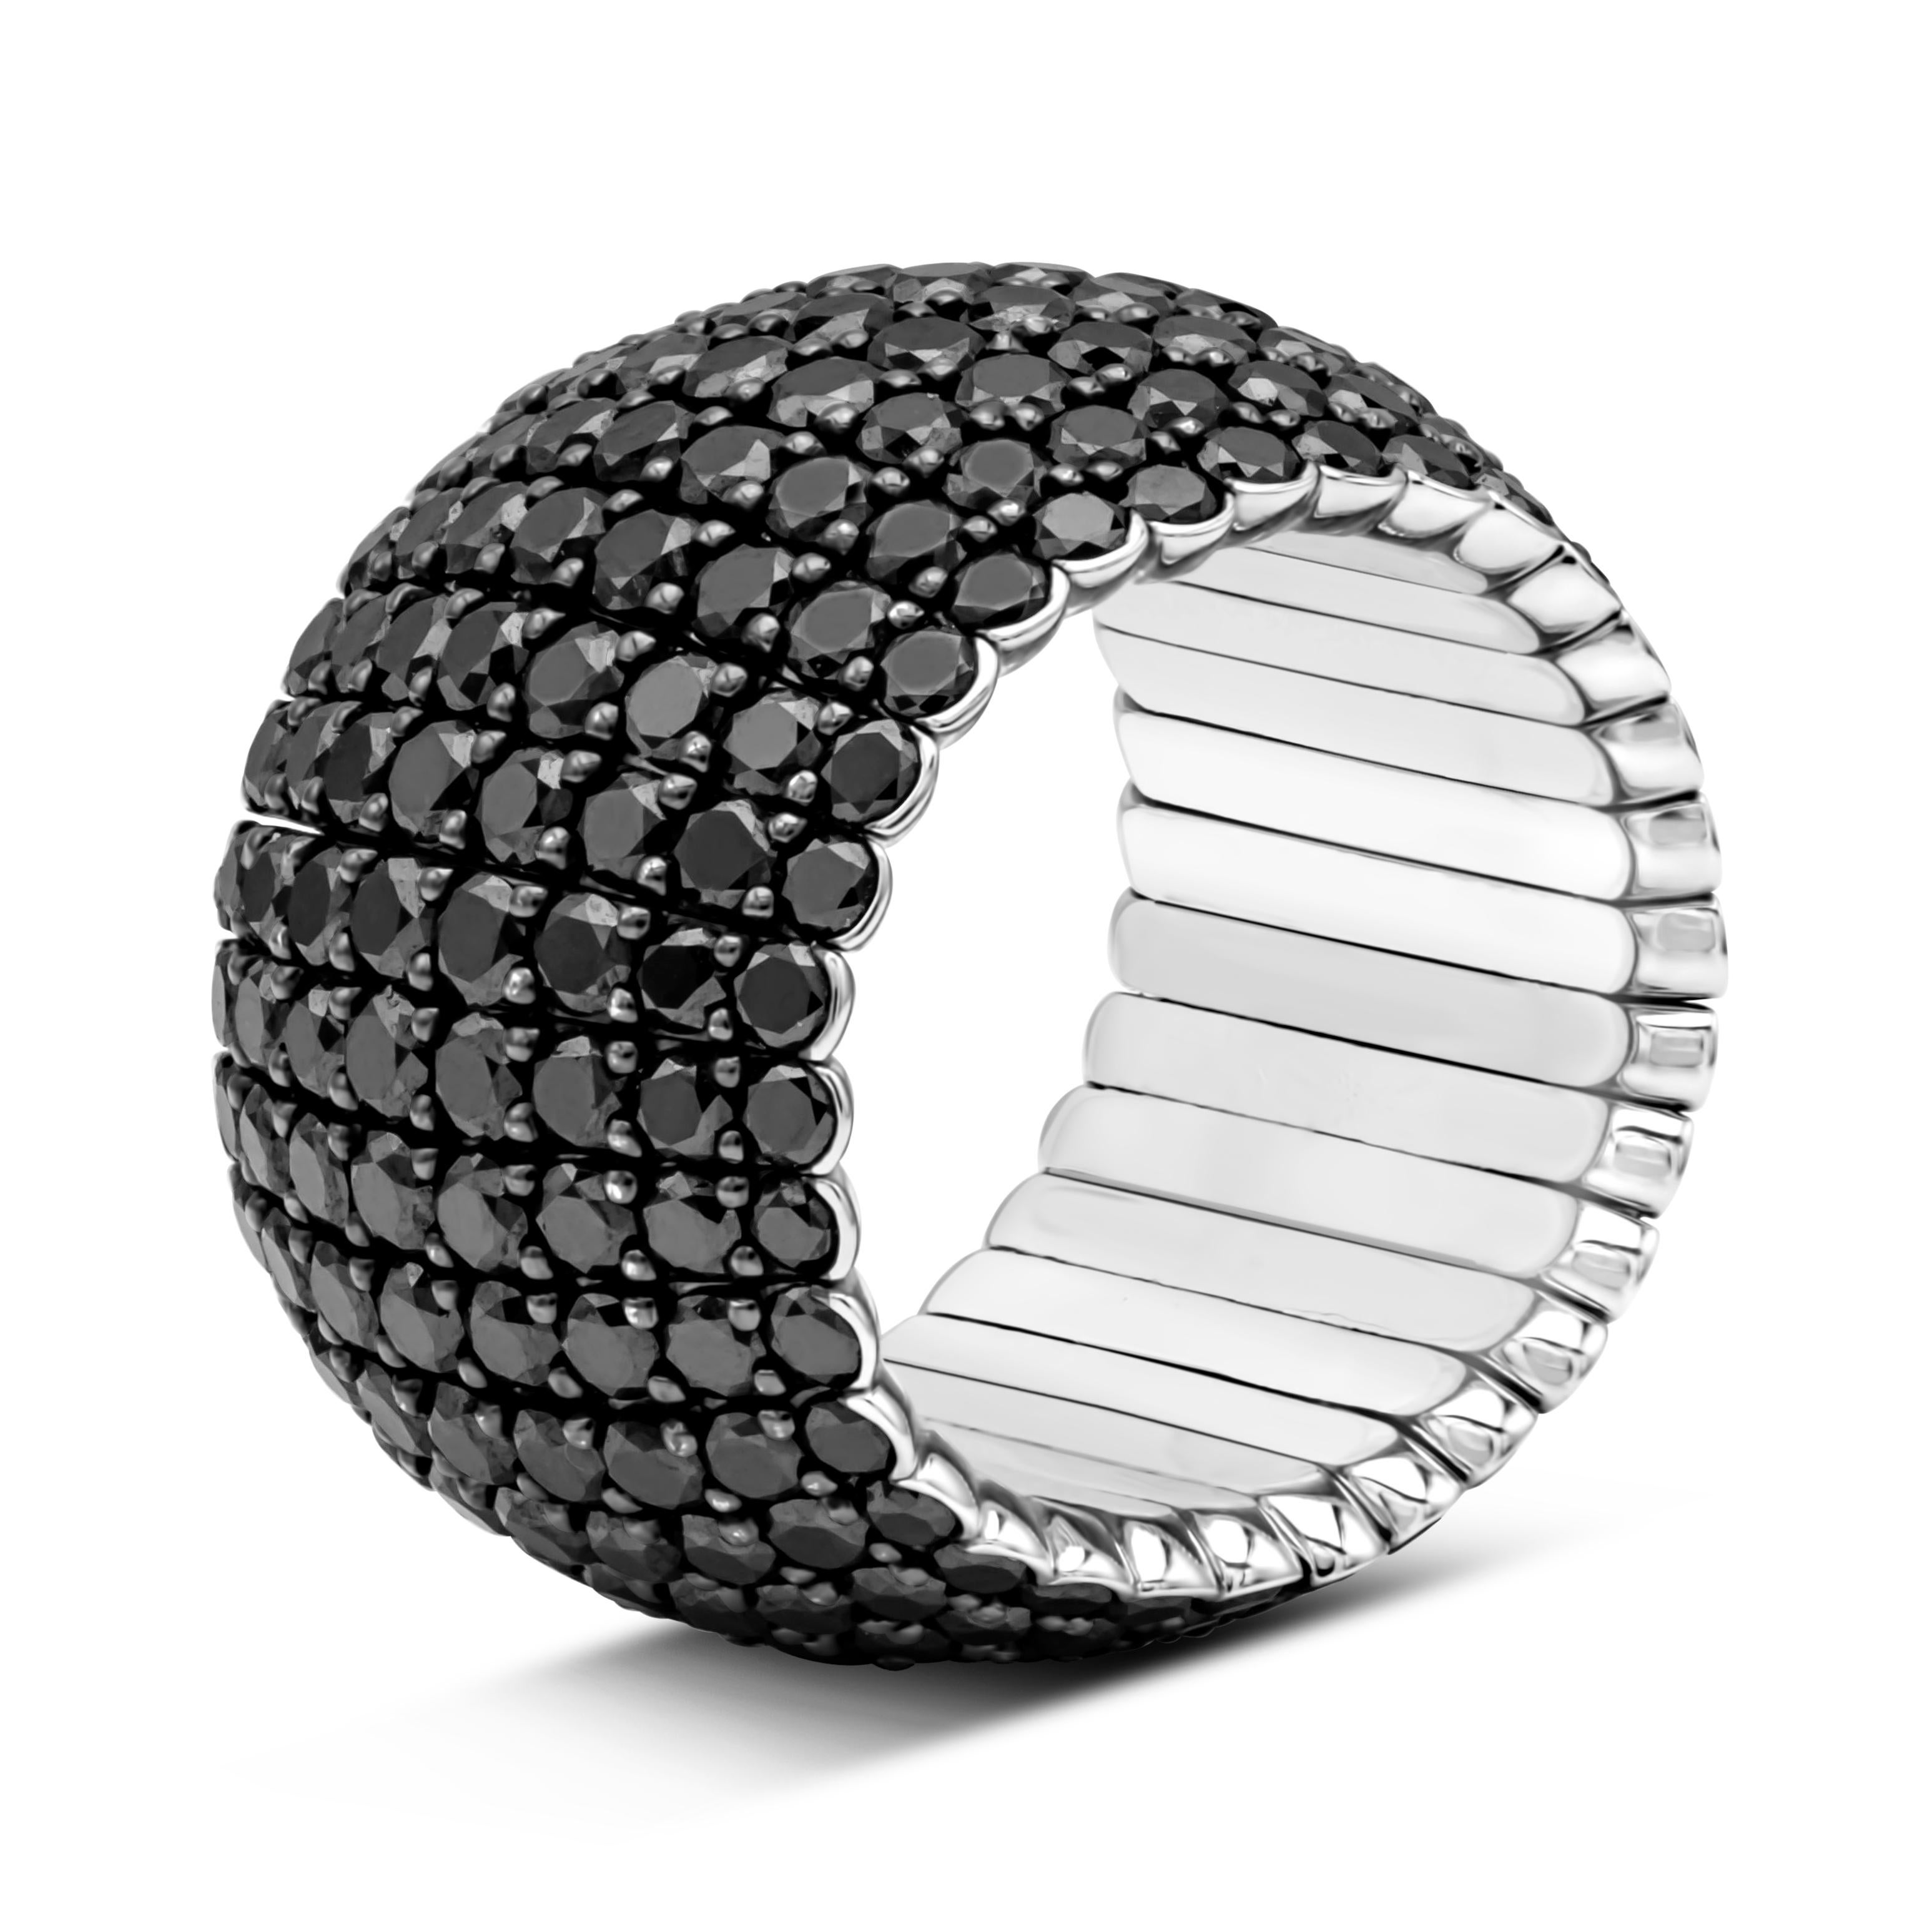 This stylish and stunning flexible fashion ring showcases eight rows of 256 brilliant round cut black diamonds weighing 9.09 carats total, set in a beautiful micro-pave set and shared prong setting. Finely made in 18k white gold. Size 7 US resizable